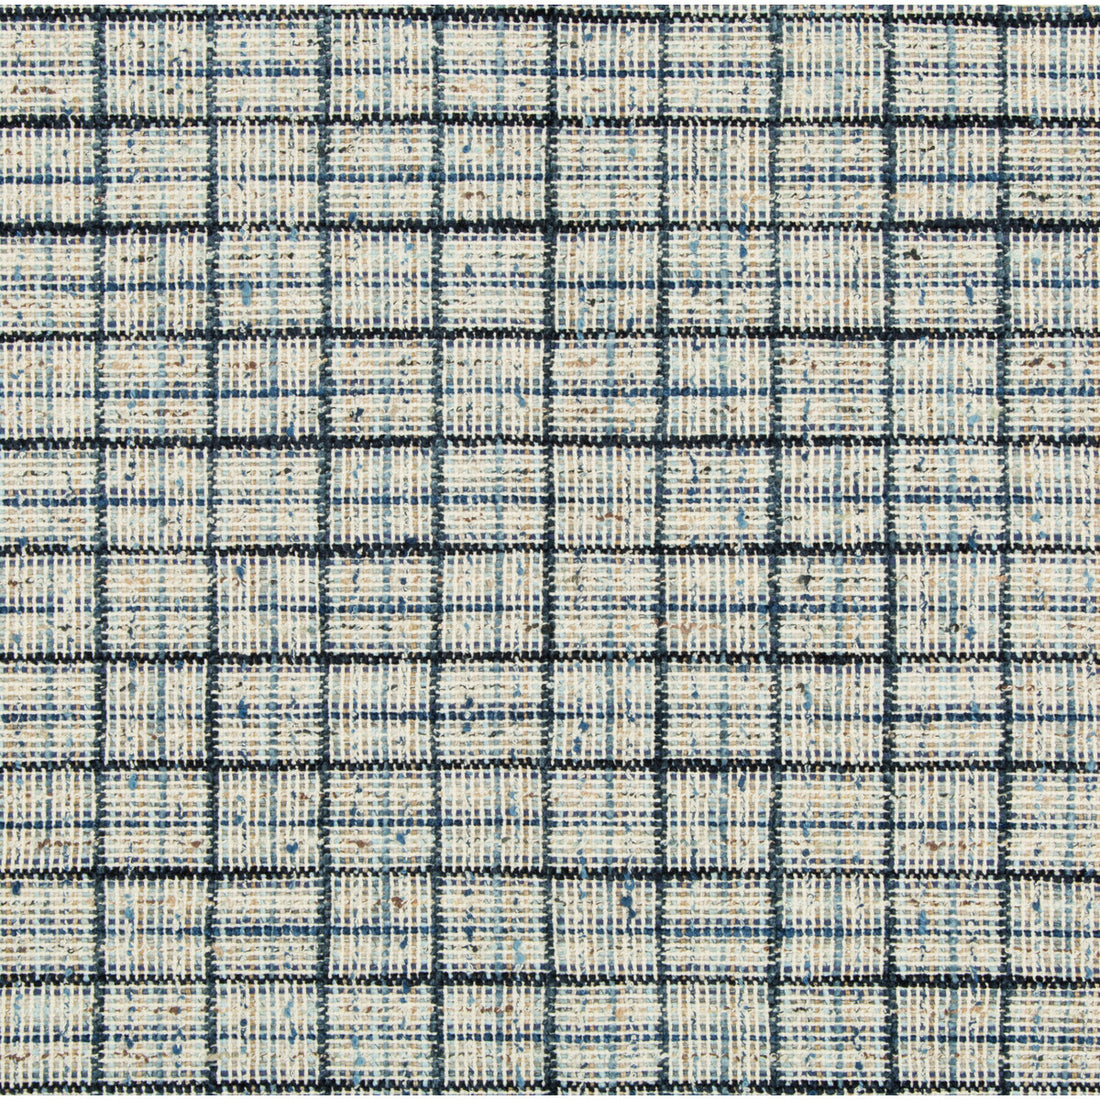 Wenthworth Check fabric in marine color - pattern 35188.1516.0 - by Kravet Couture in the David Phoenix Well-Suited collection